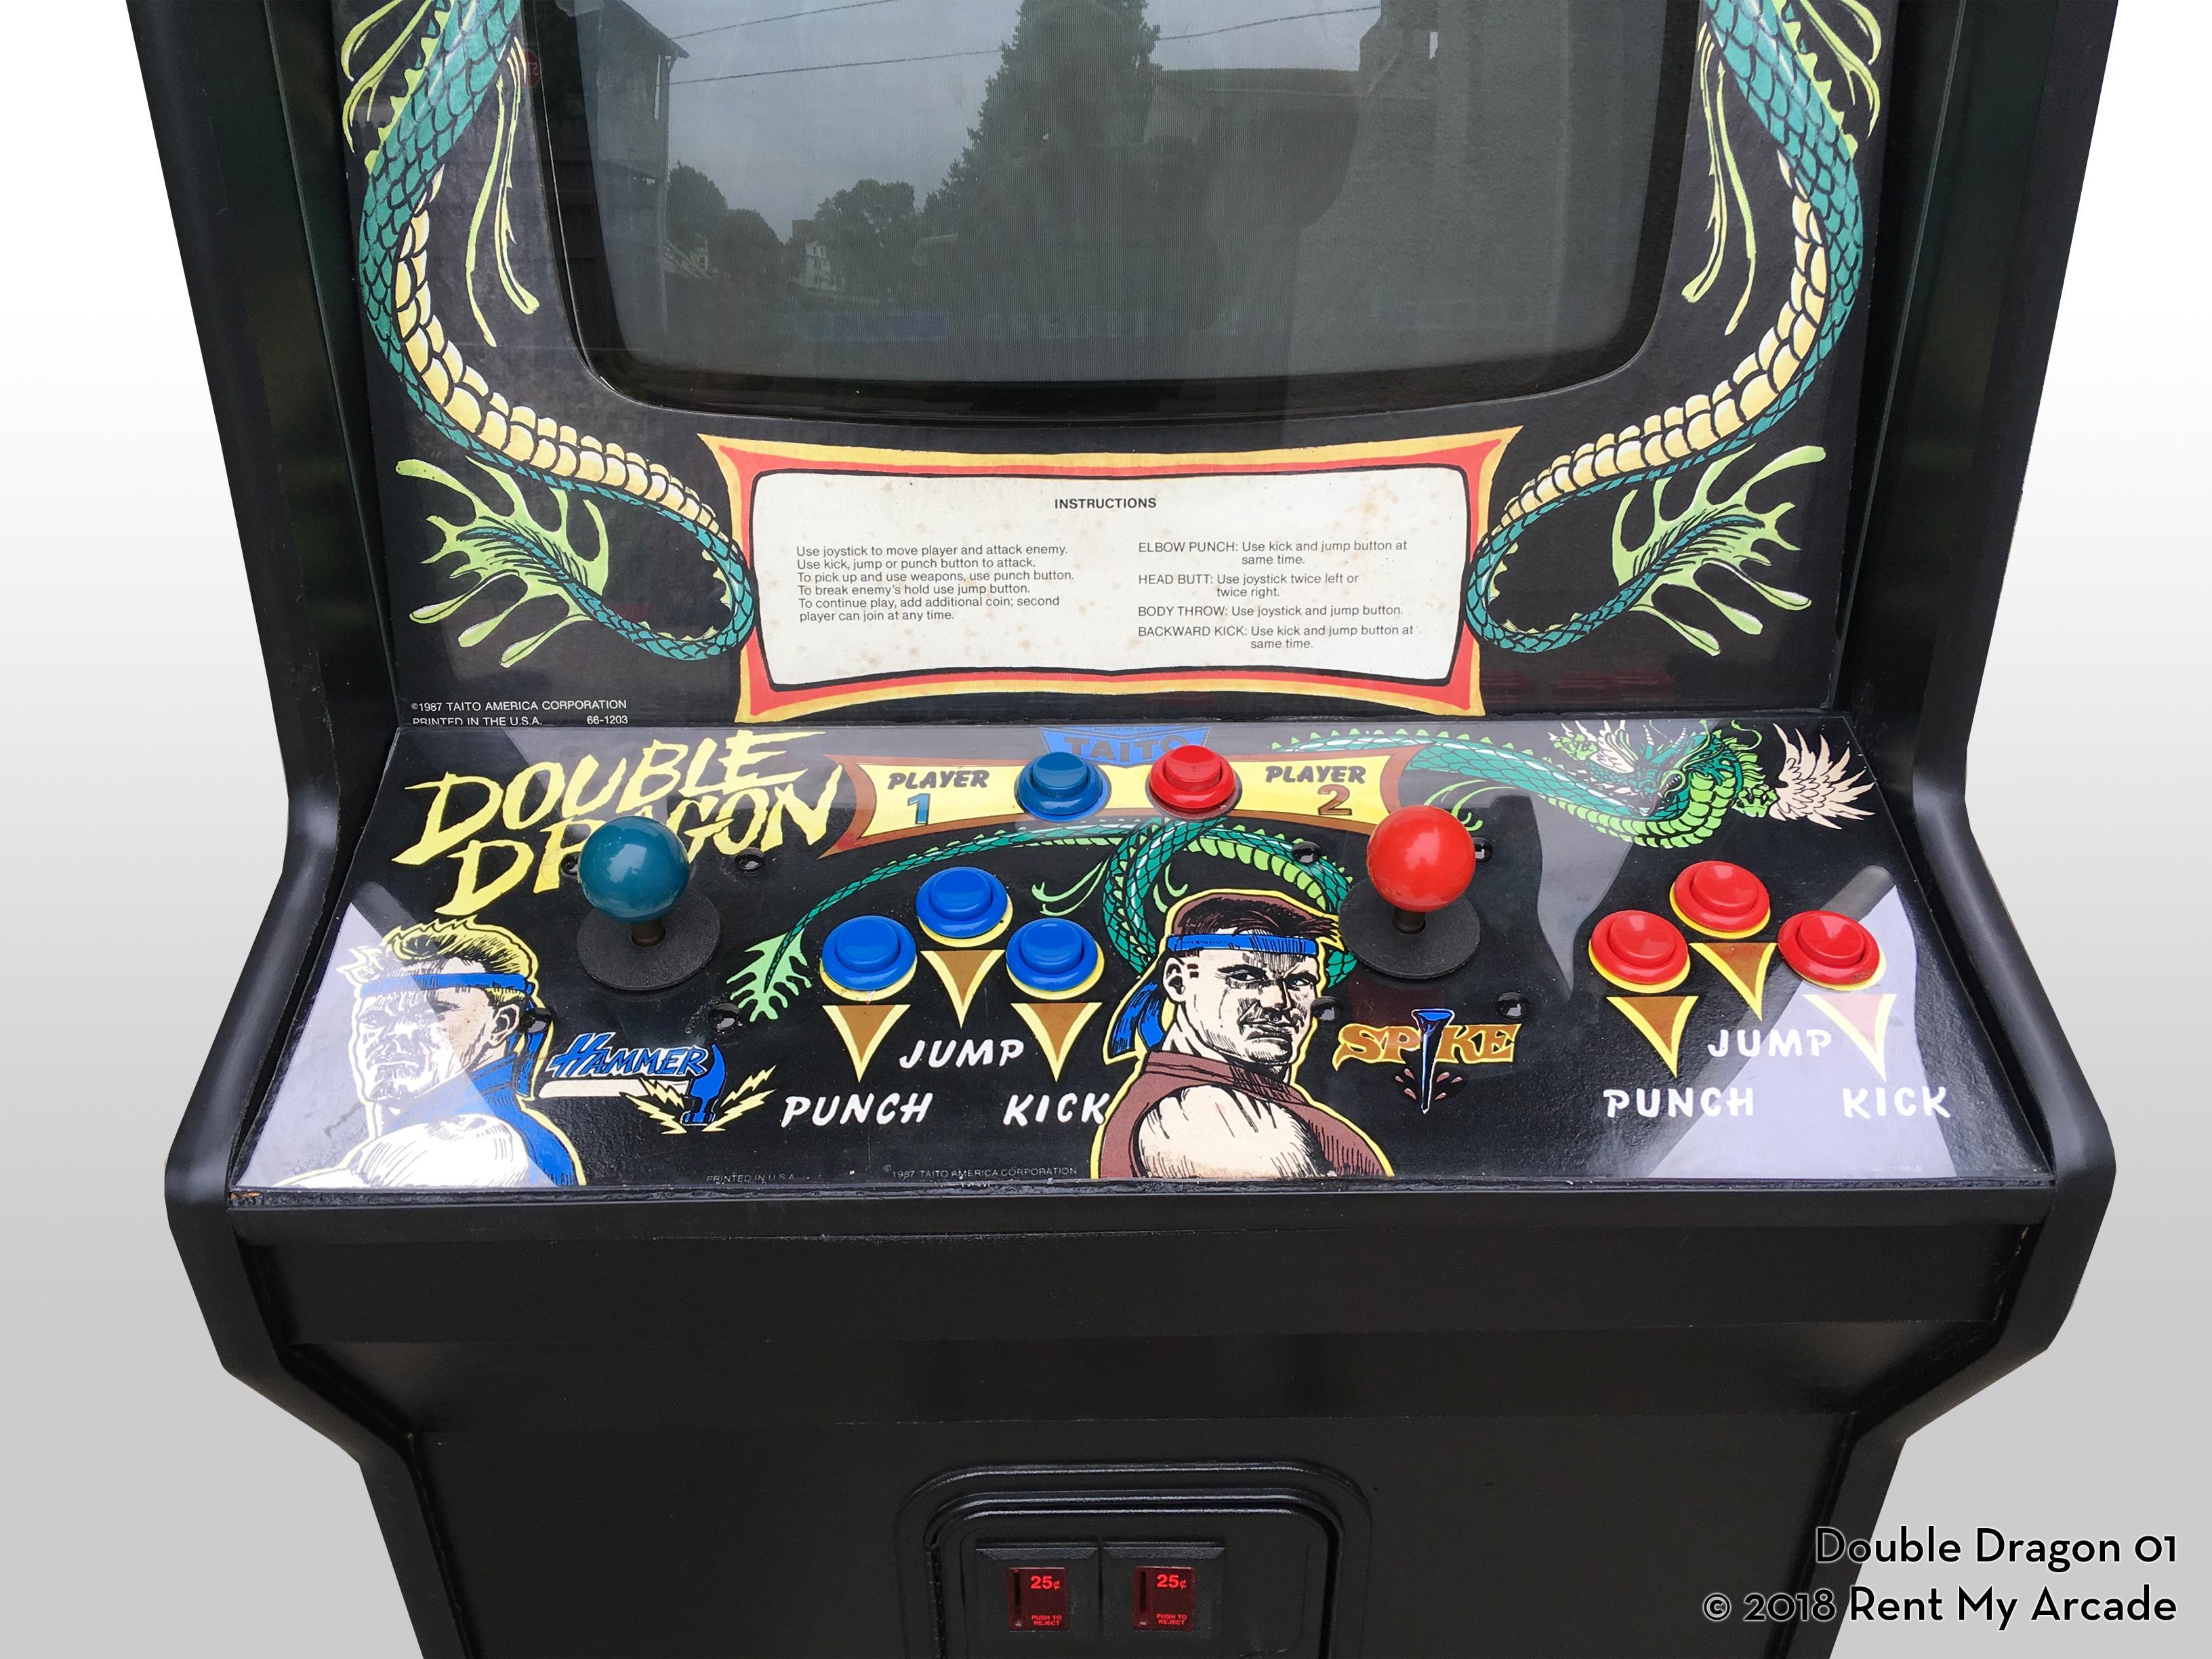 Double Dragon Arcade- Lots Of New Parts,Extra Sharp-Delivery time 6-8 weeks